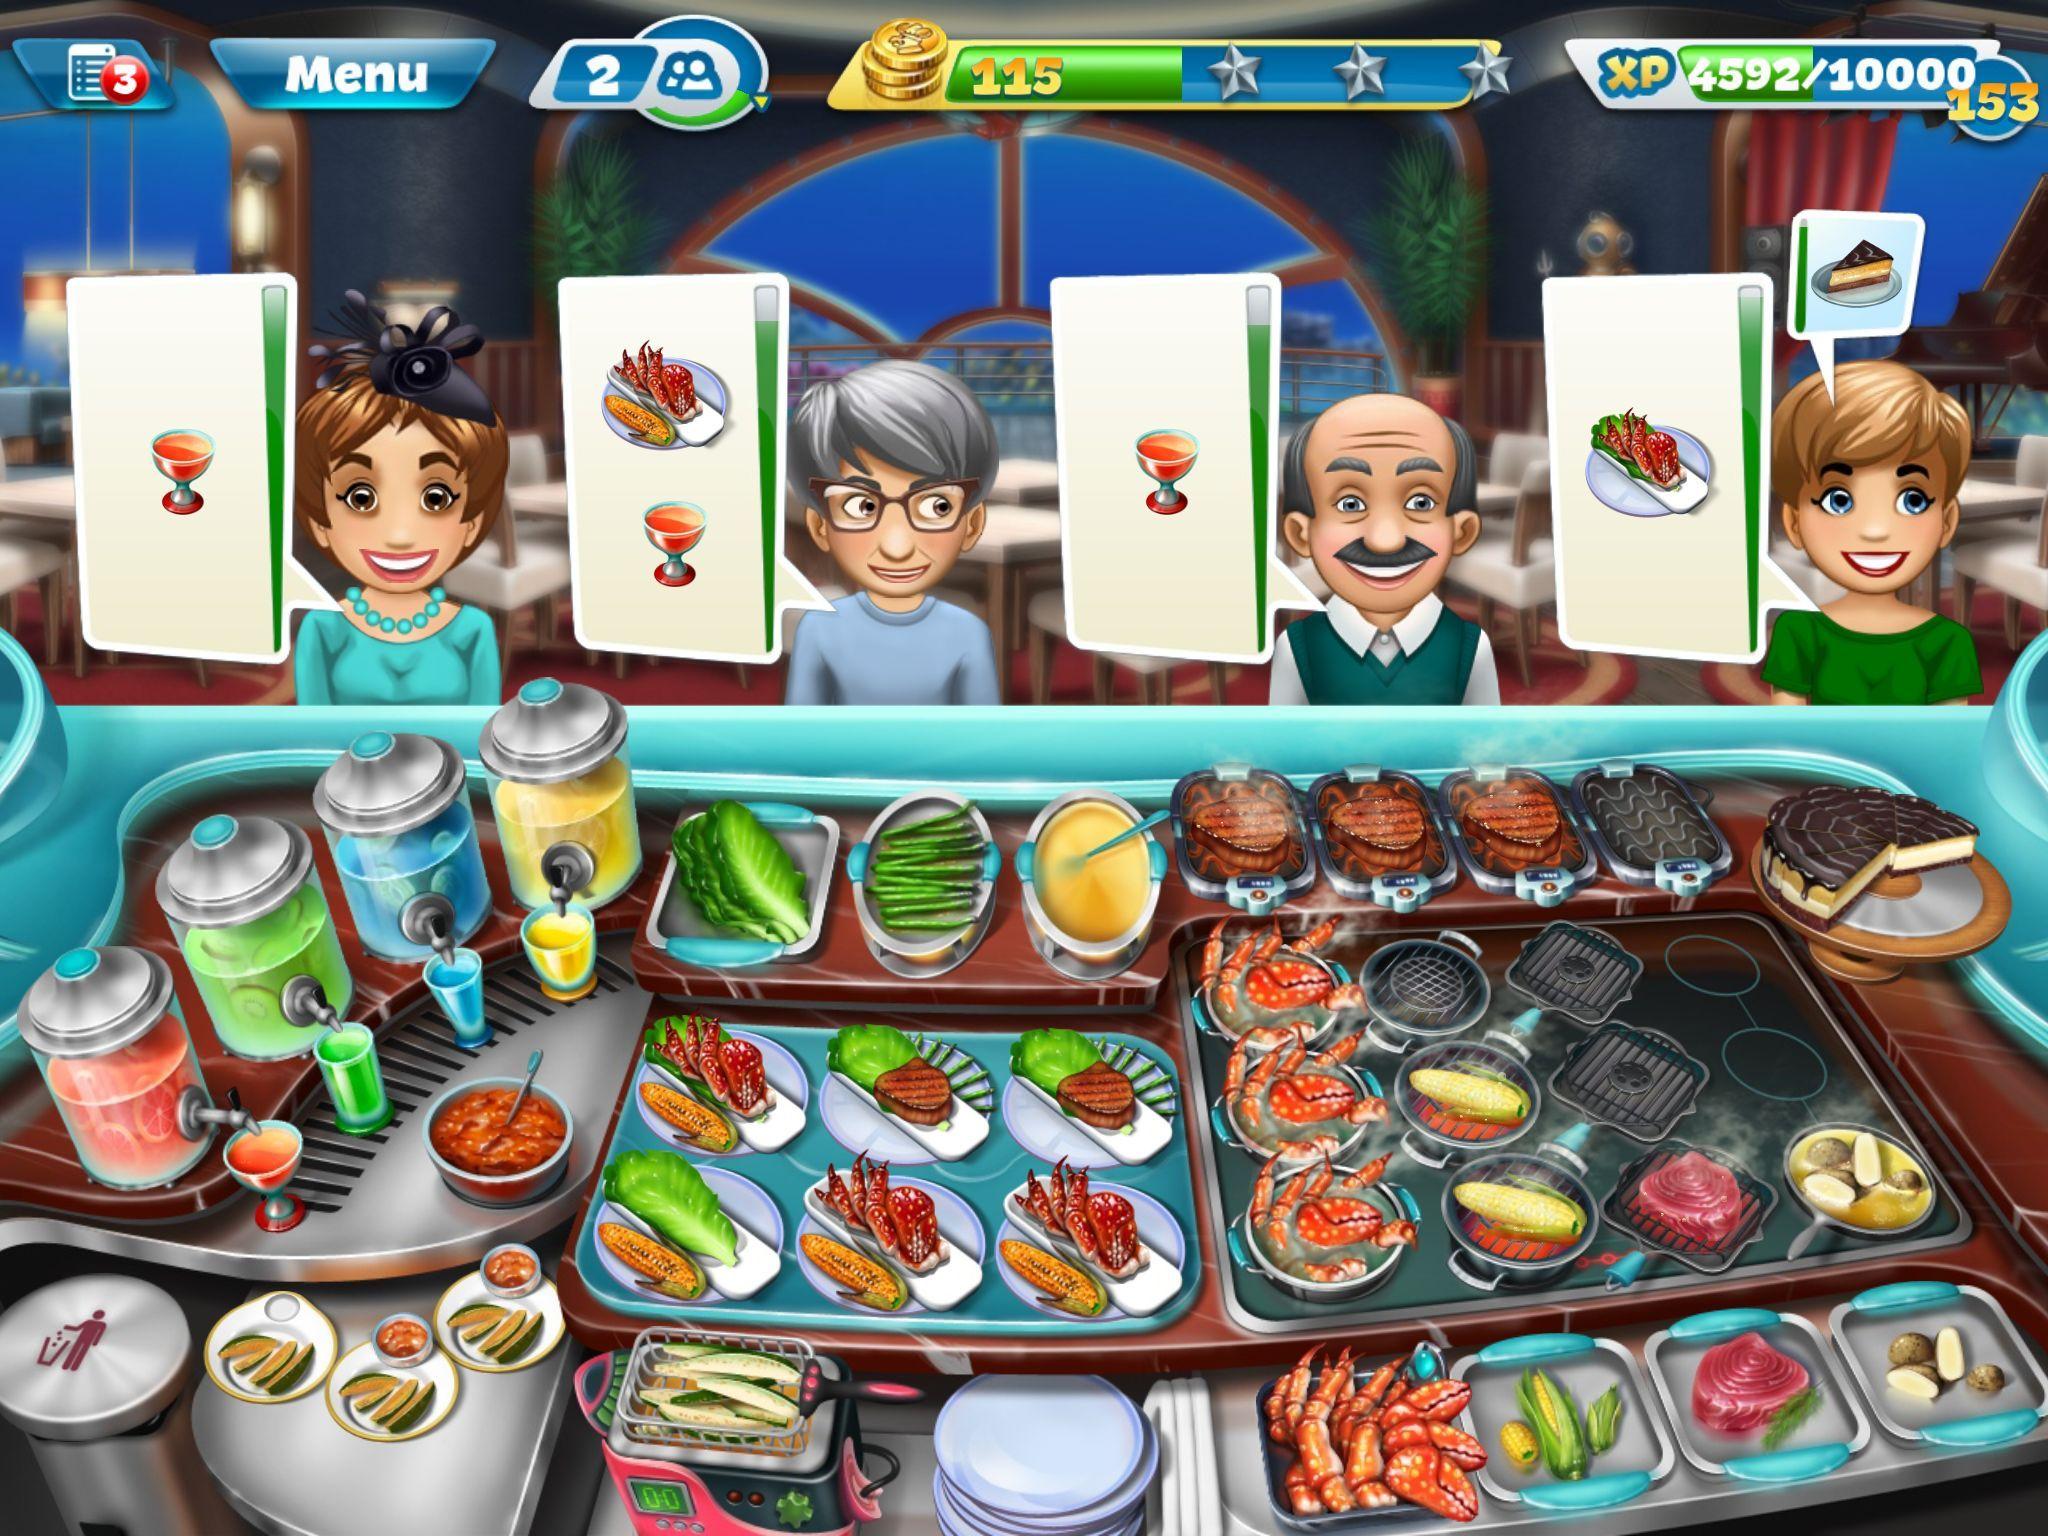 cooking fever hells kitchen automatic